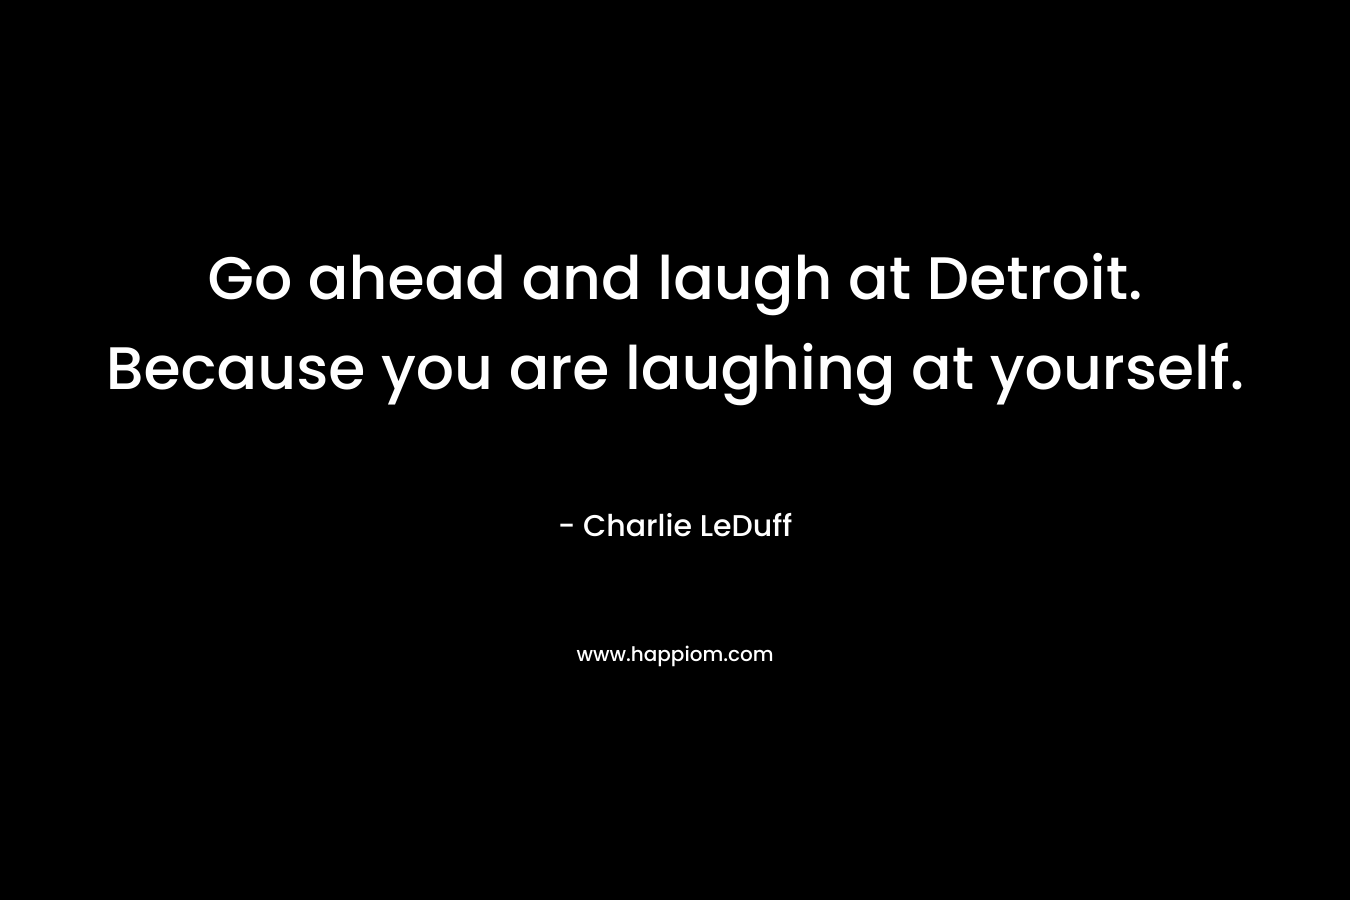 Go ahead and laugh at Detroit. Because you are laughing at yourself. – Charlie LeDuff